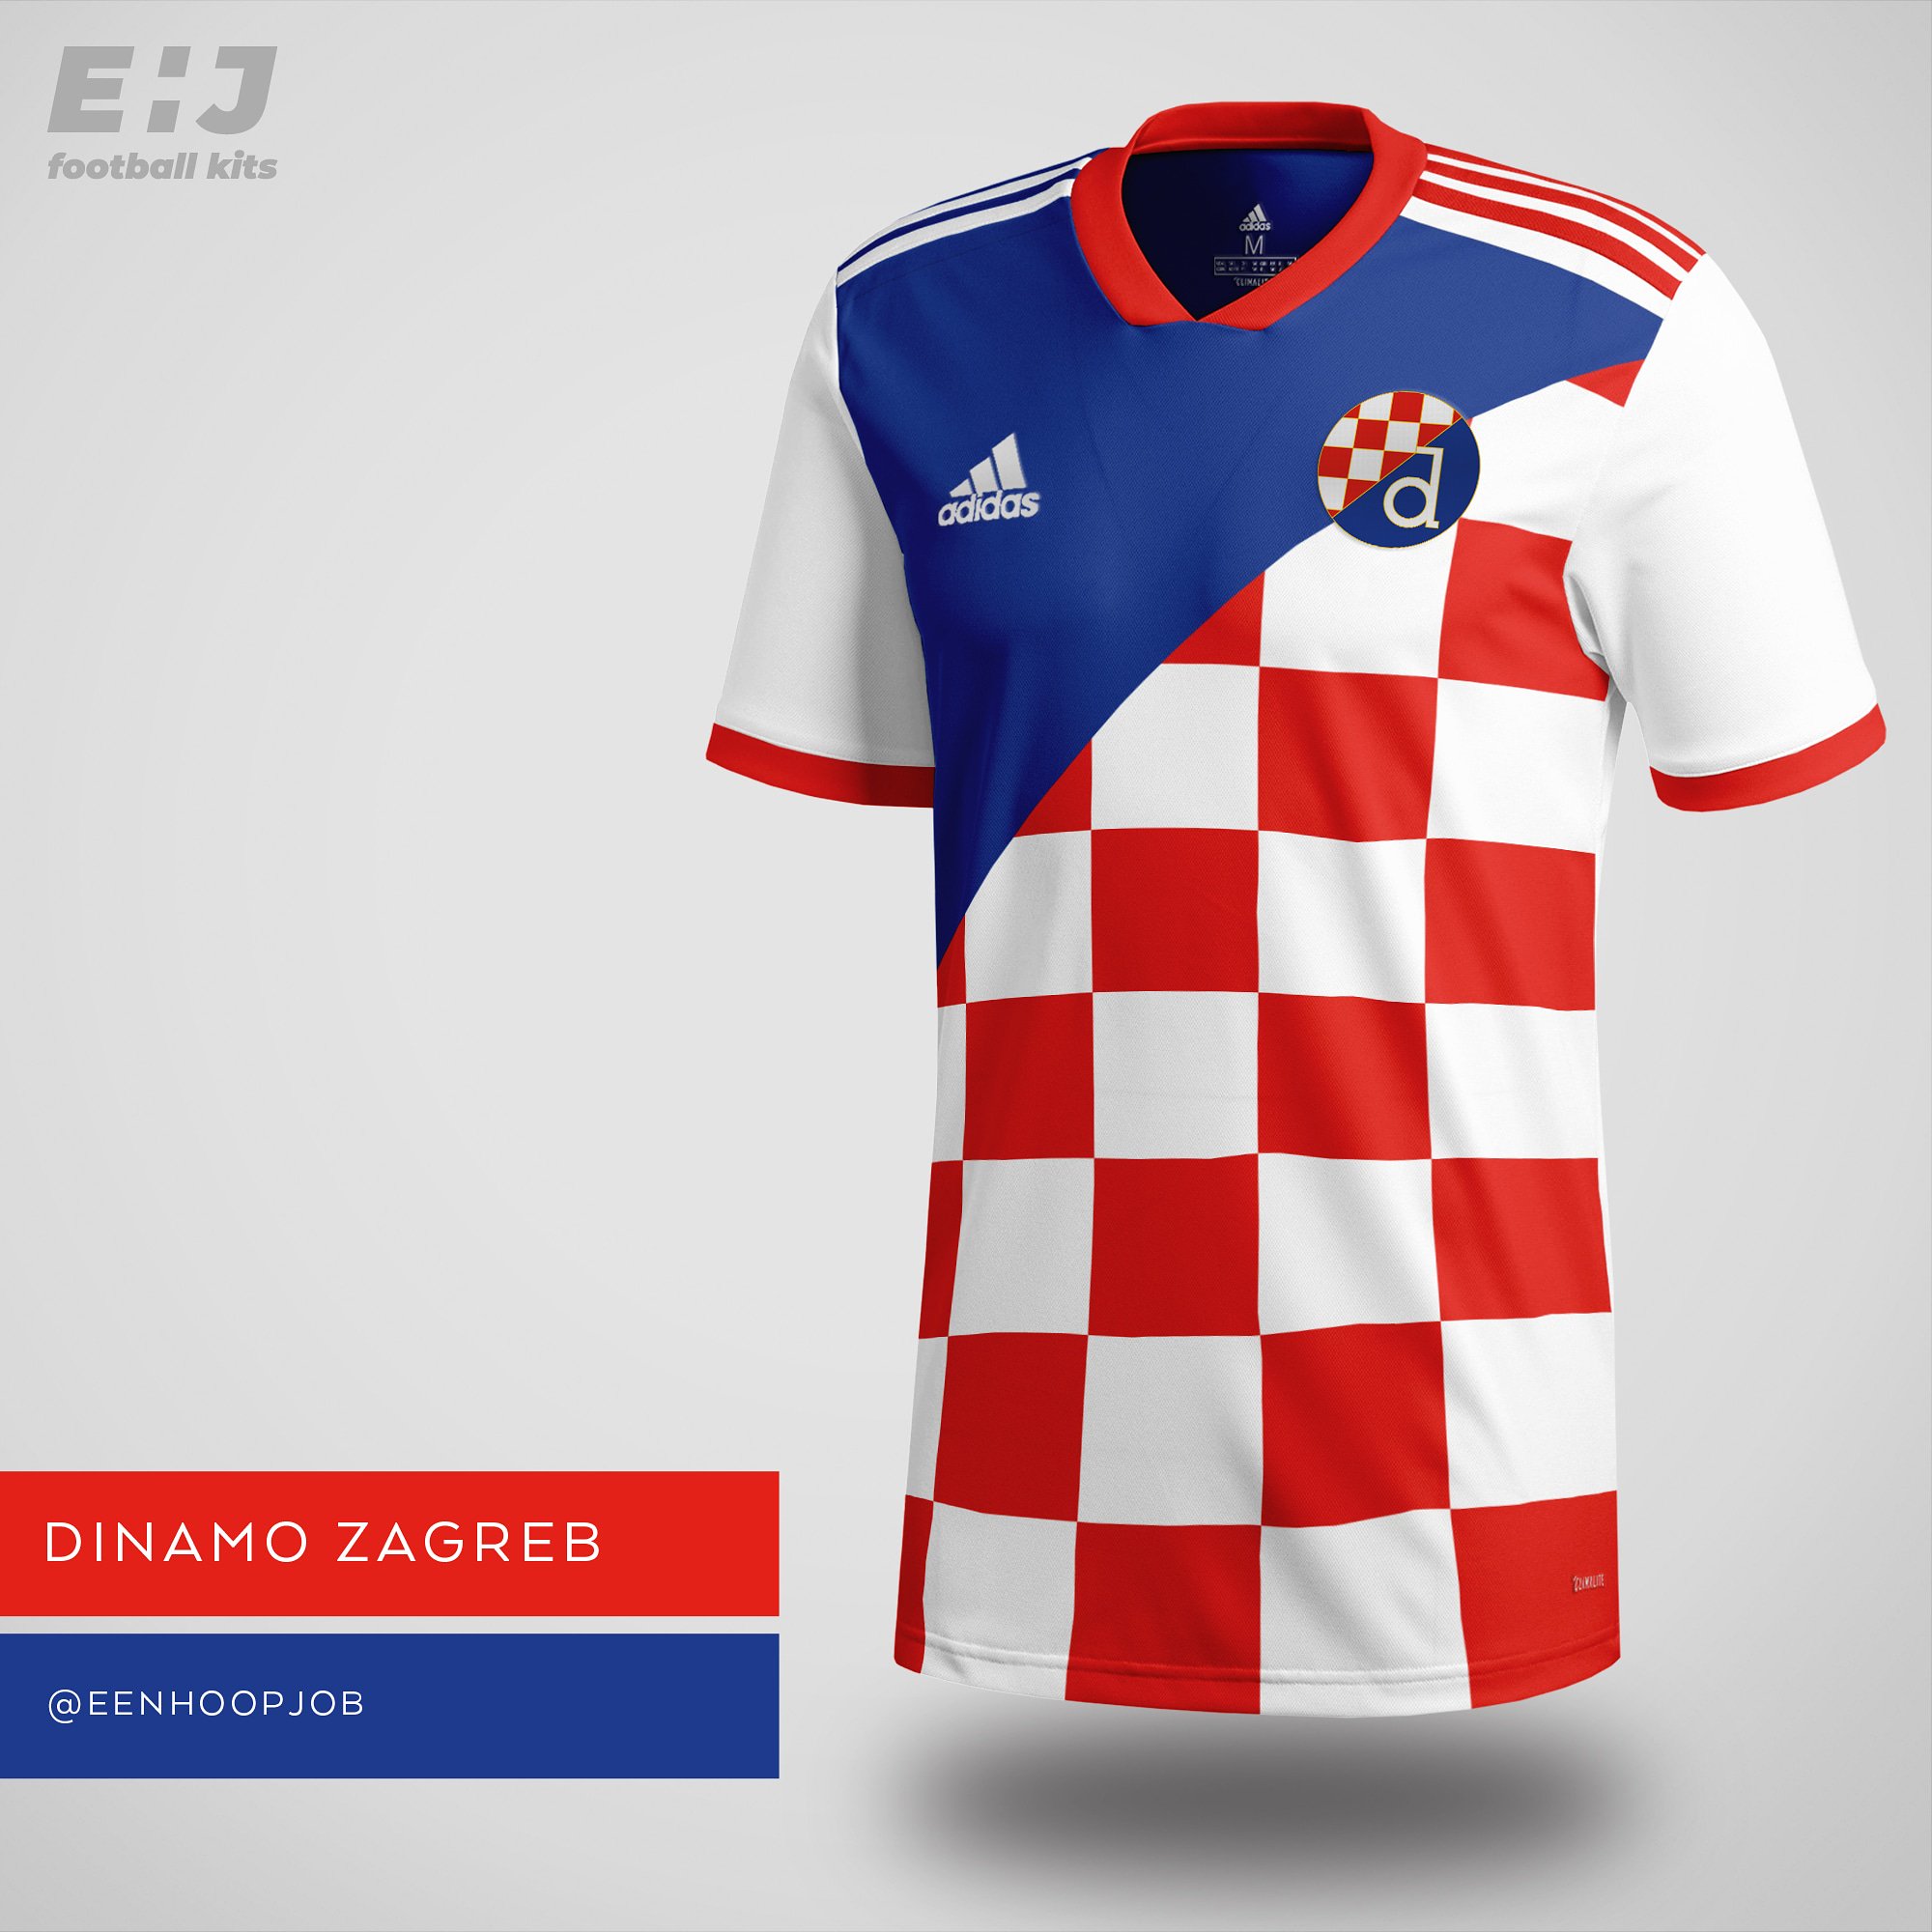 Job - eenhoopjob football kits on Twitter: "GNK Zagreb Home Kit Concept Please rate 1-10 and drop a if you like it #dinamo #zagreb #dinamozagreb #adidas #adidassoccer #adidasfootball https://t.co/yJMUfobiSK" /